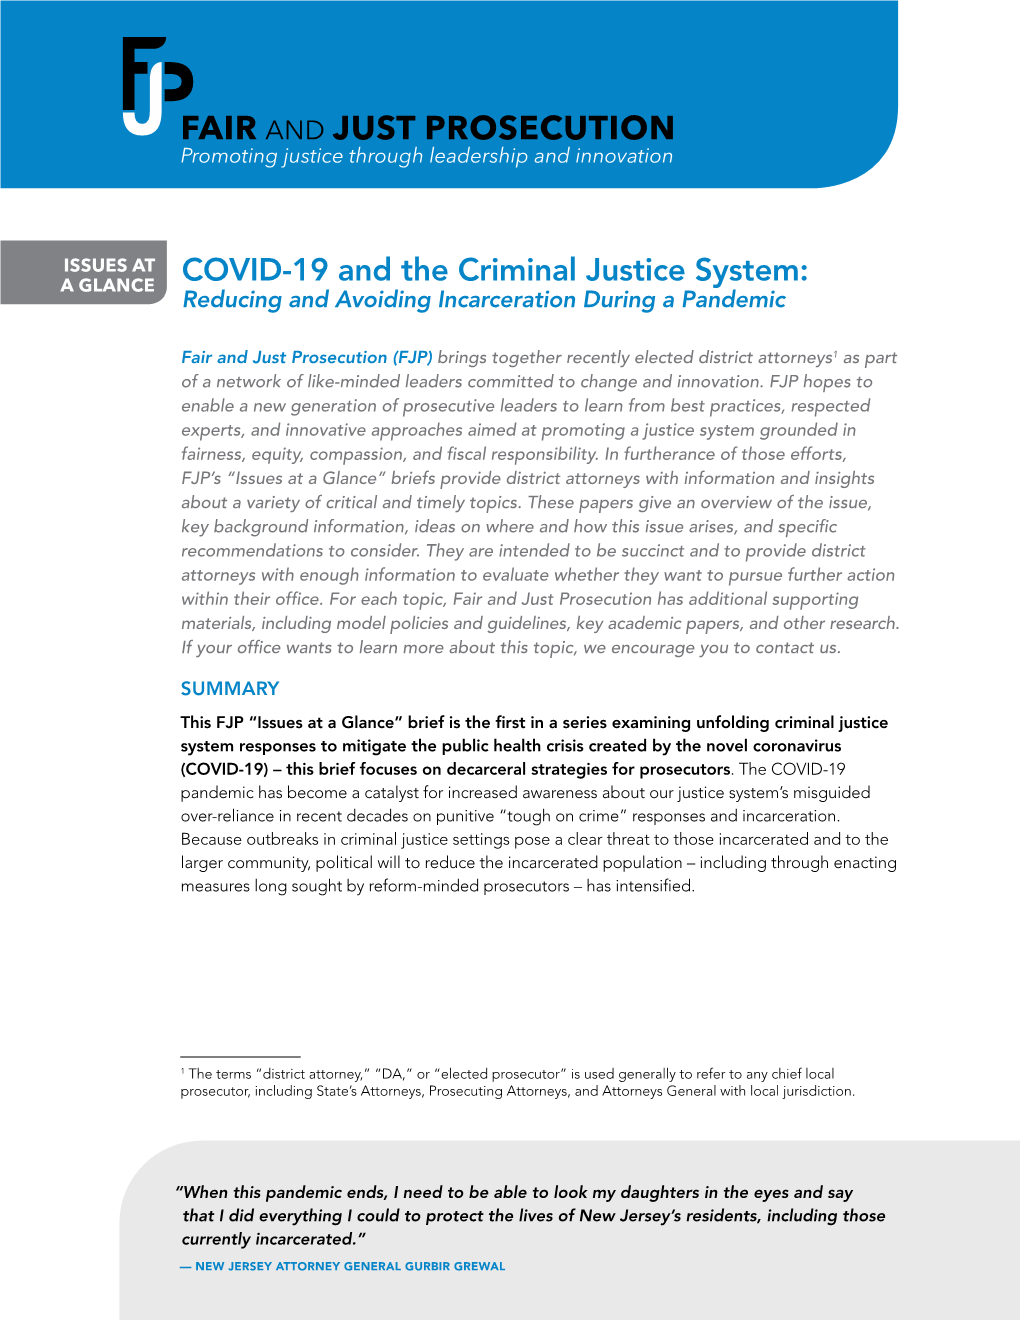 COVID-19 and the Criminal Justice System: a GLANCE Reducing and Avoiding Incarceration During a Pandemic